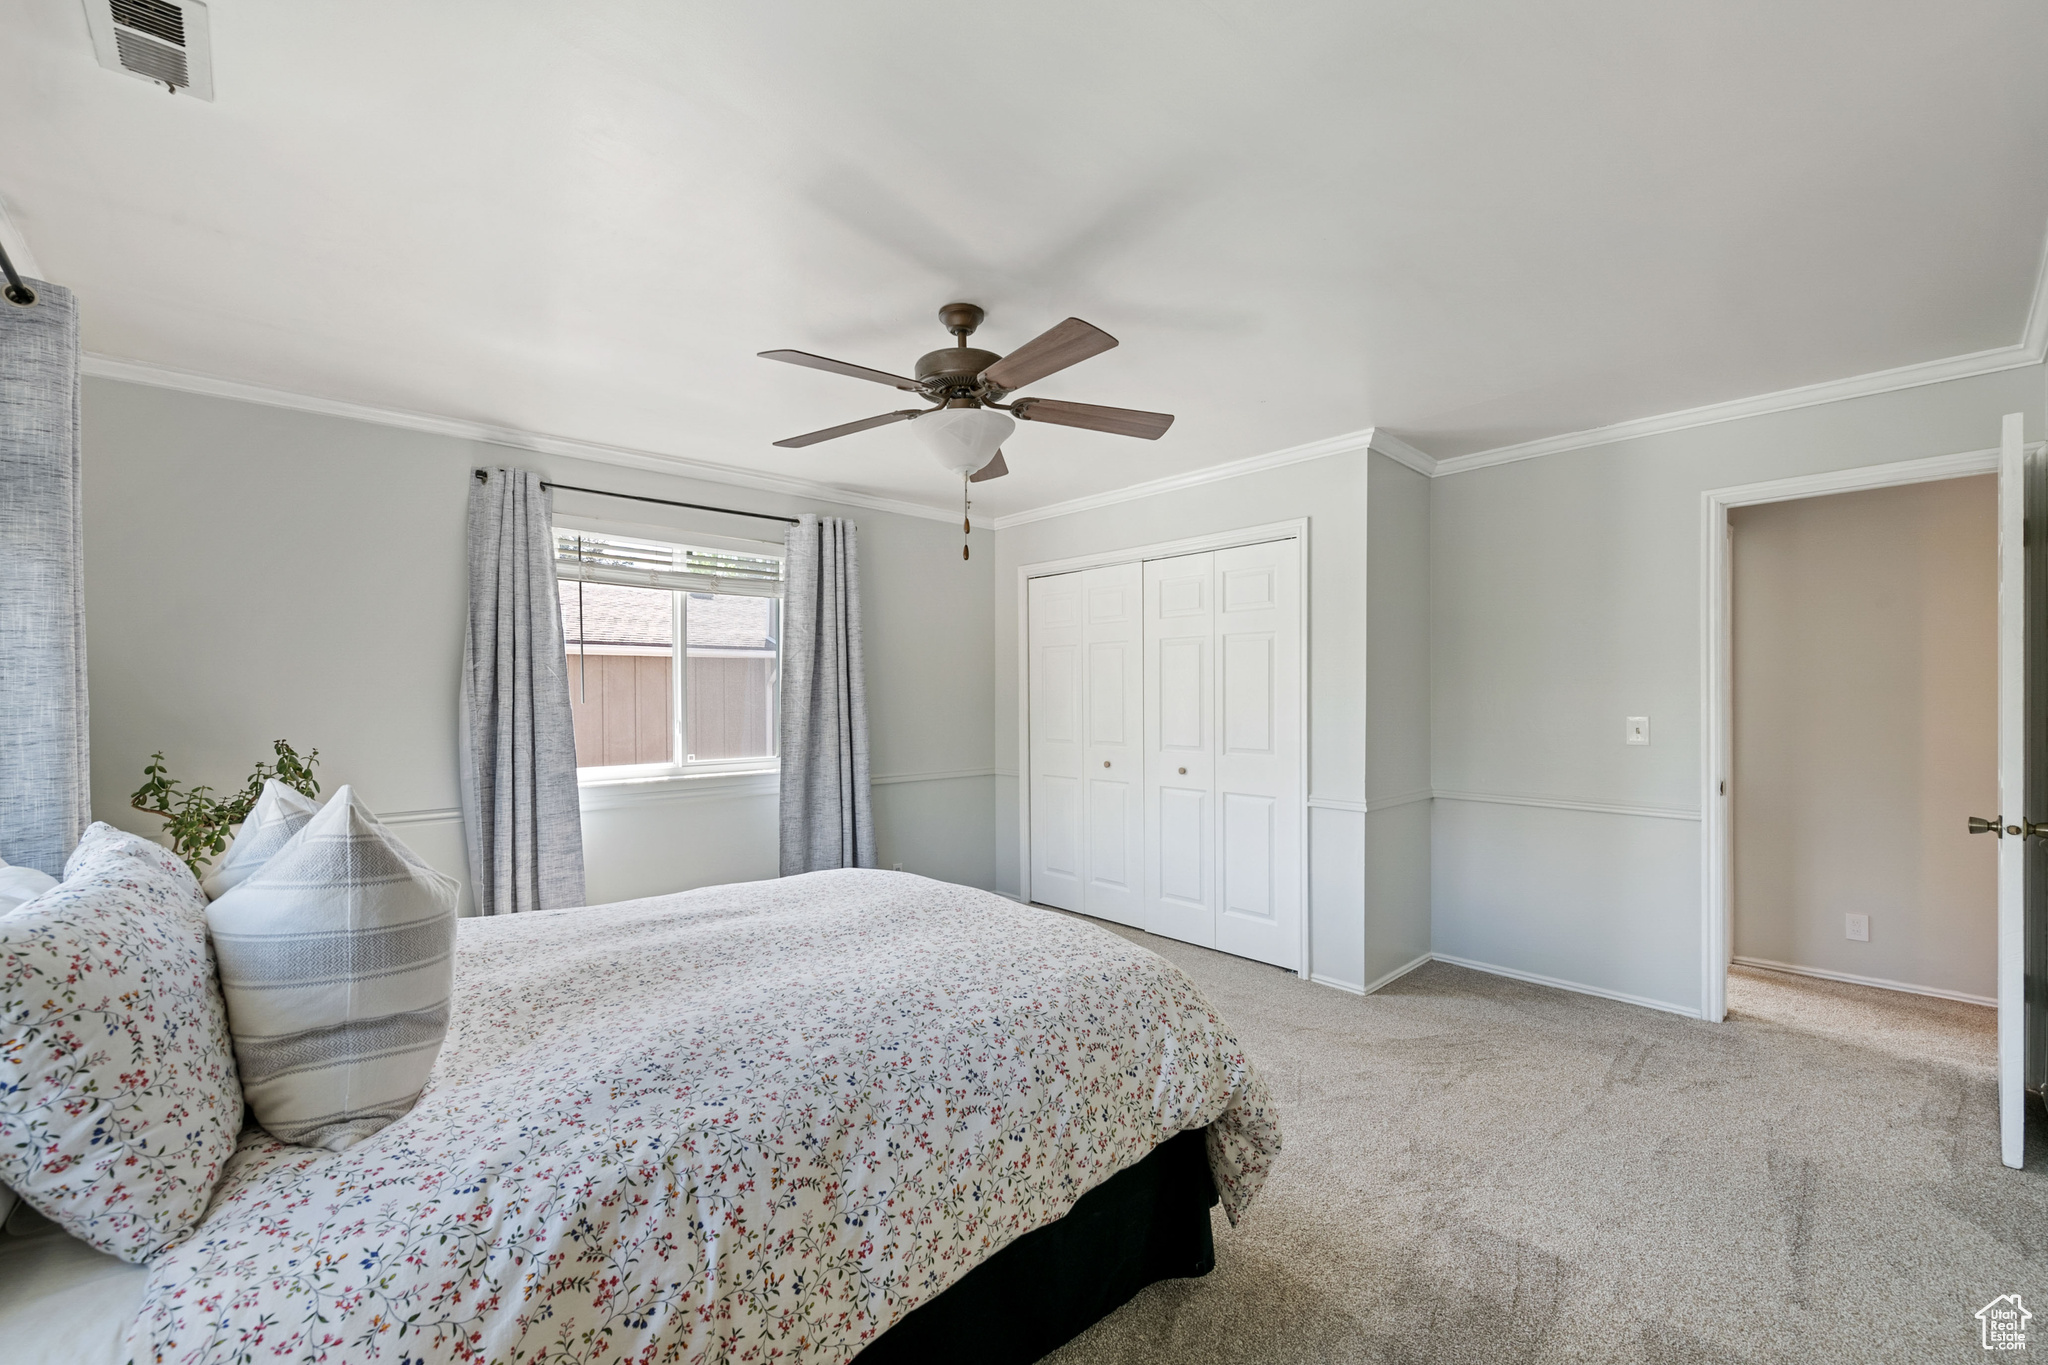 Bedroom with carpet flooring, a closet, crown molding, and ceiling fan